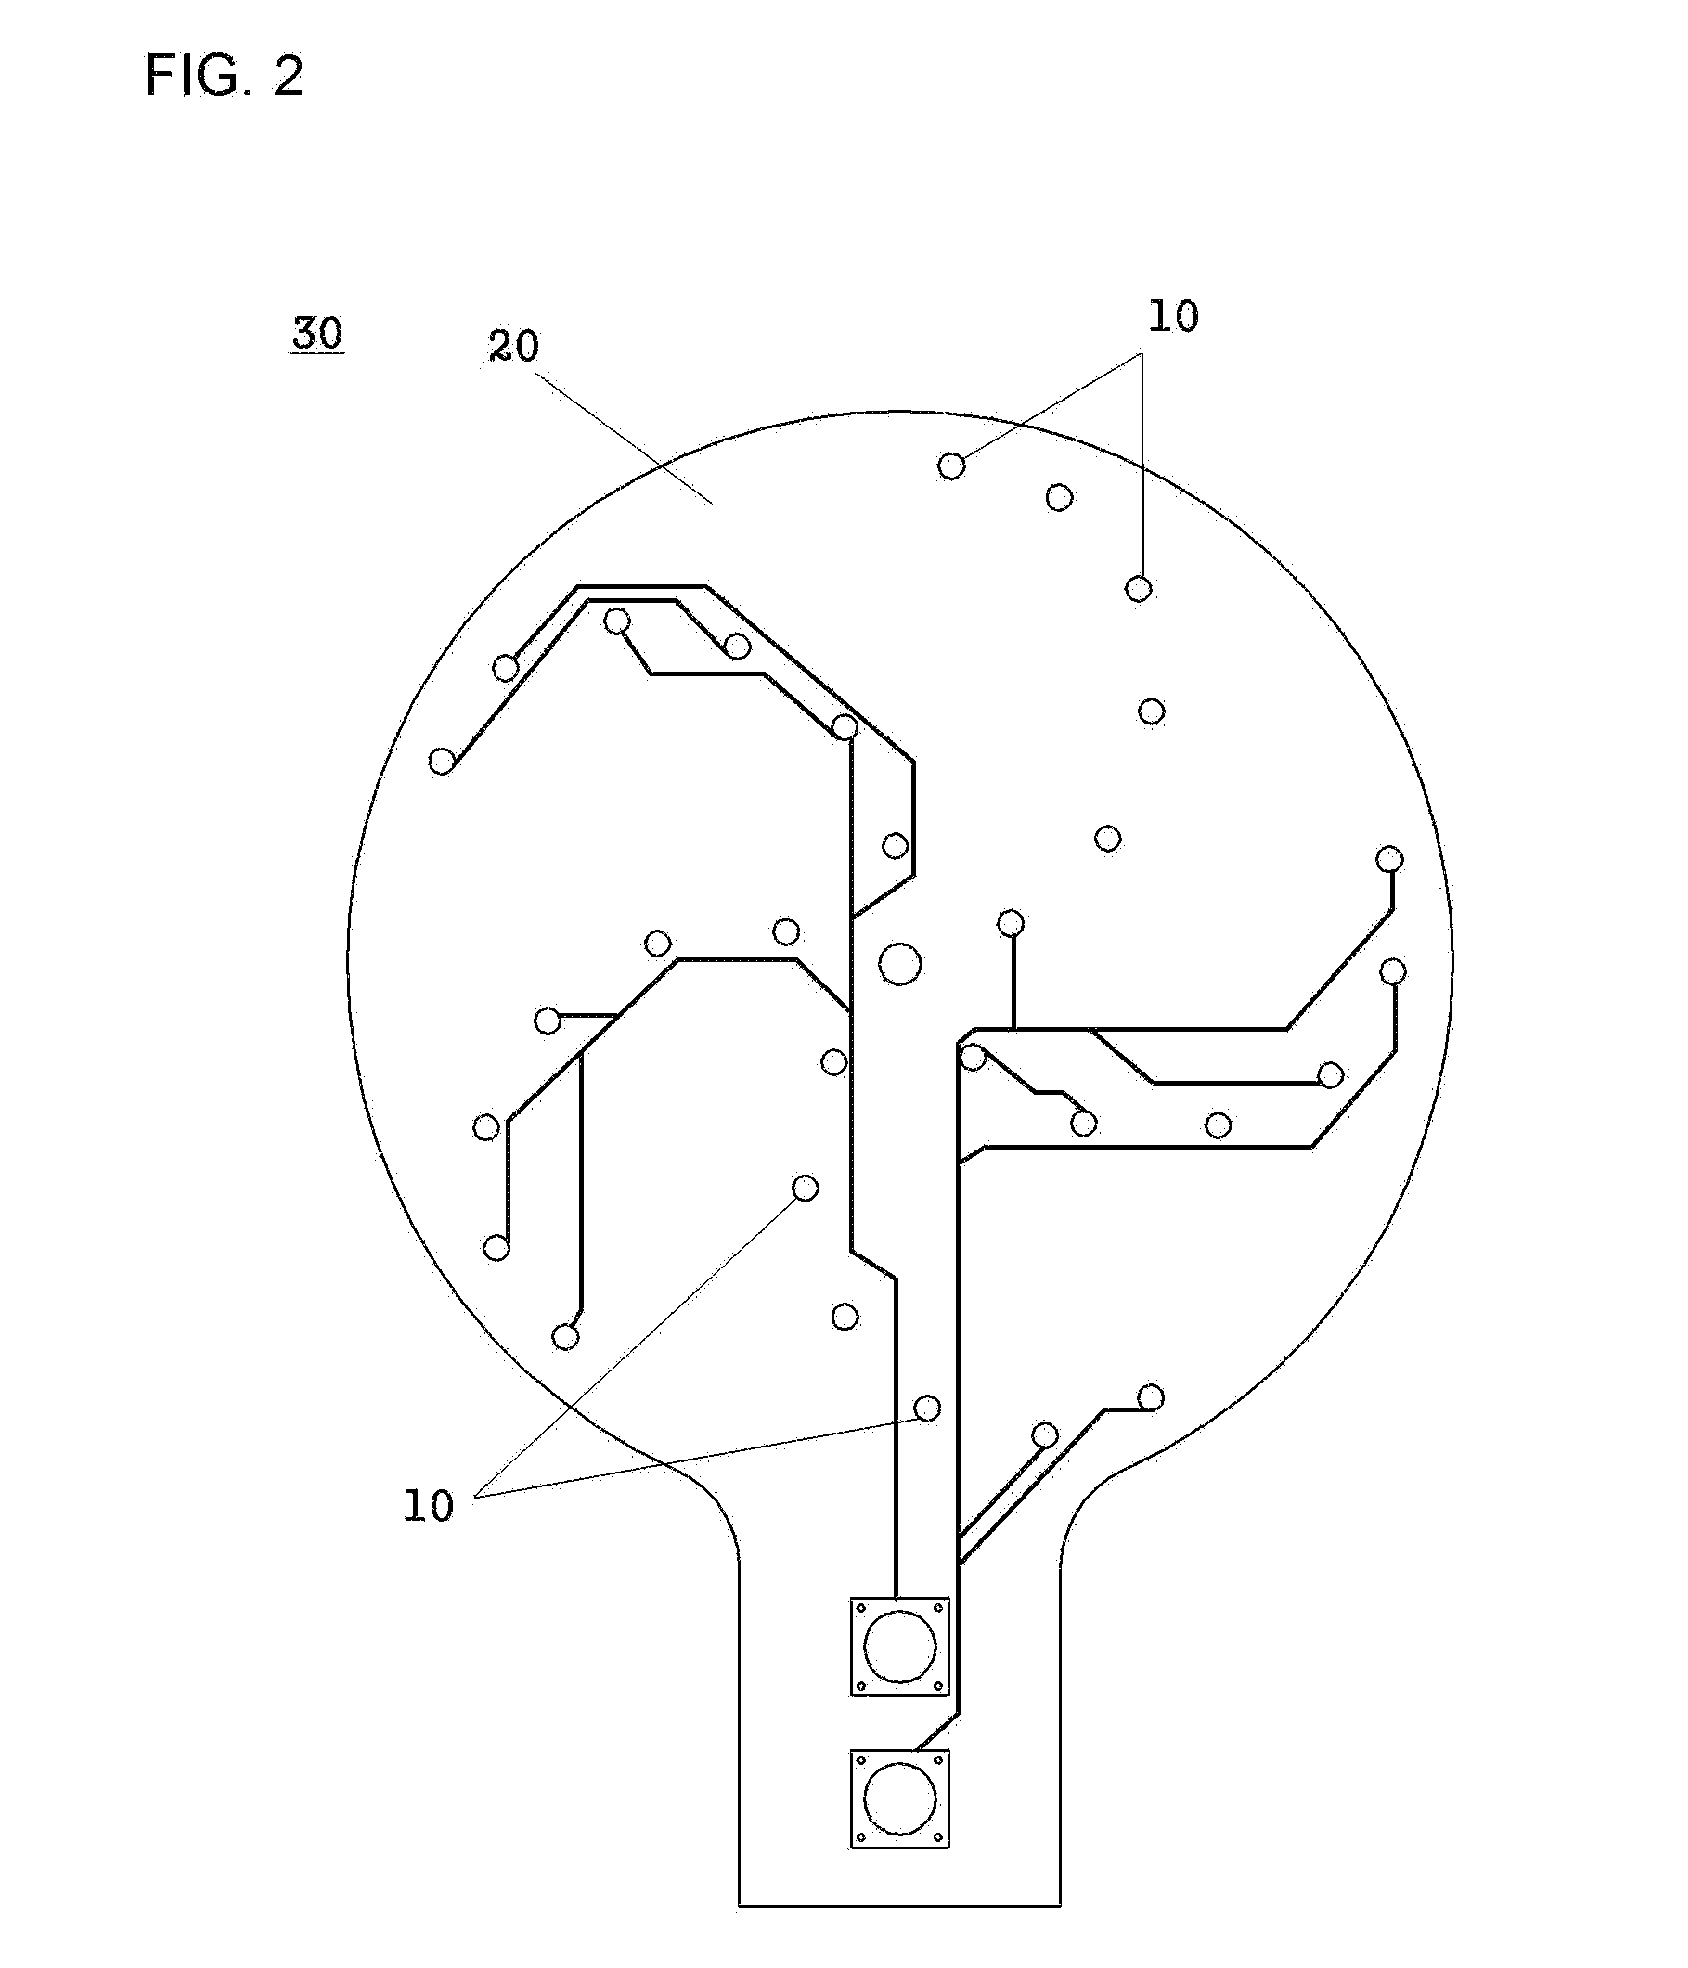 Acoustic sensor apparatus and acoustic camera for using MEMS microphone array